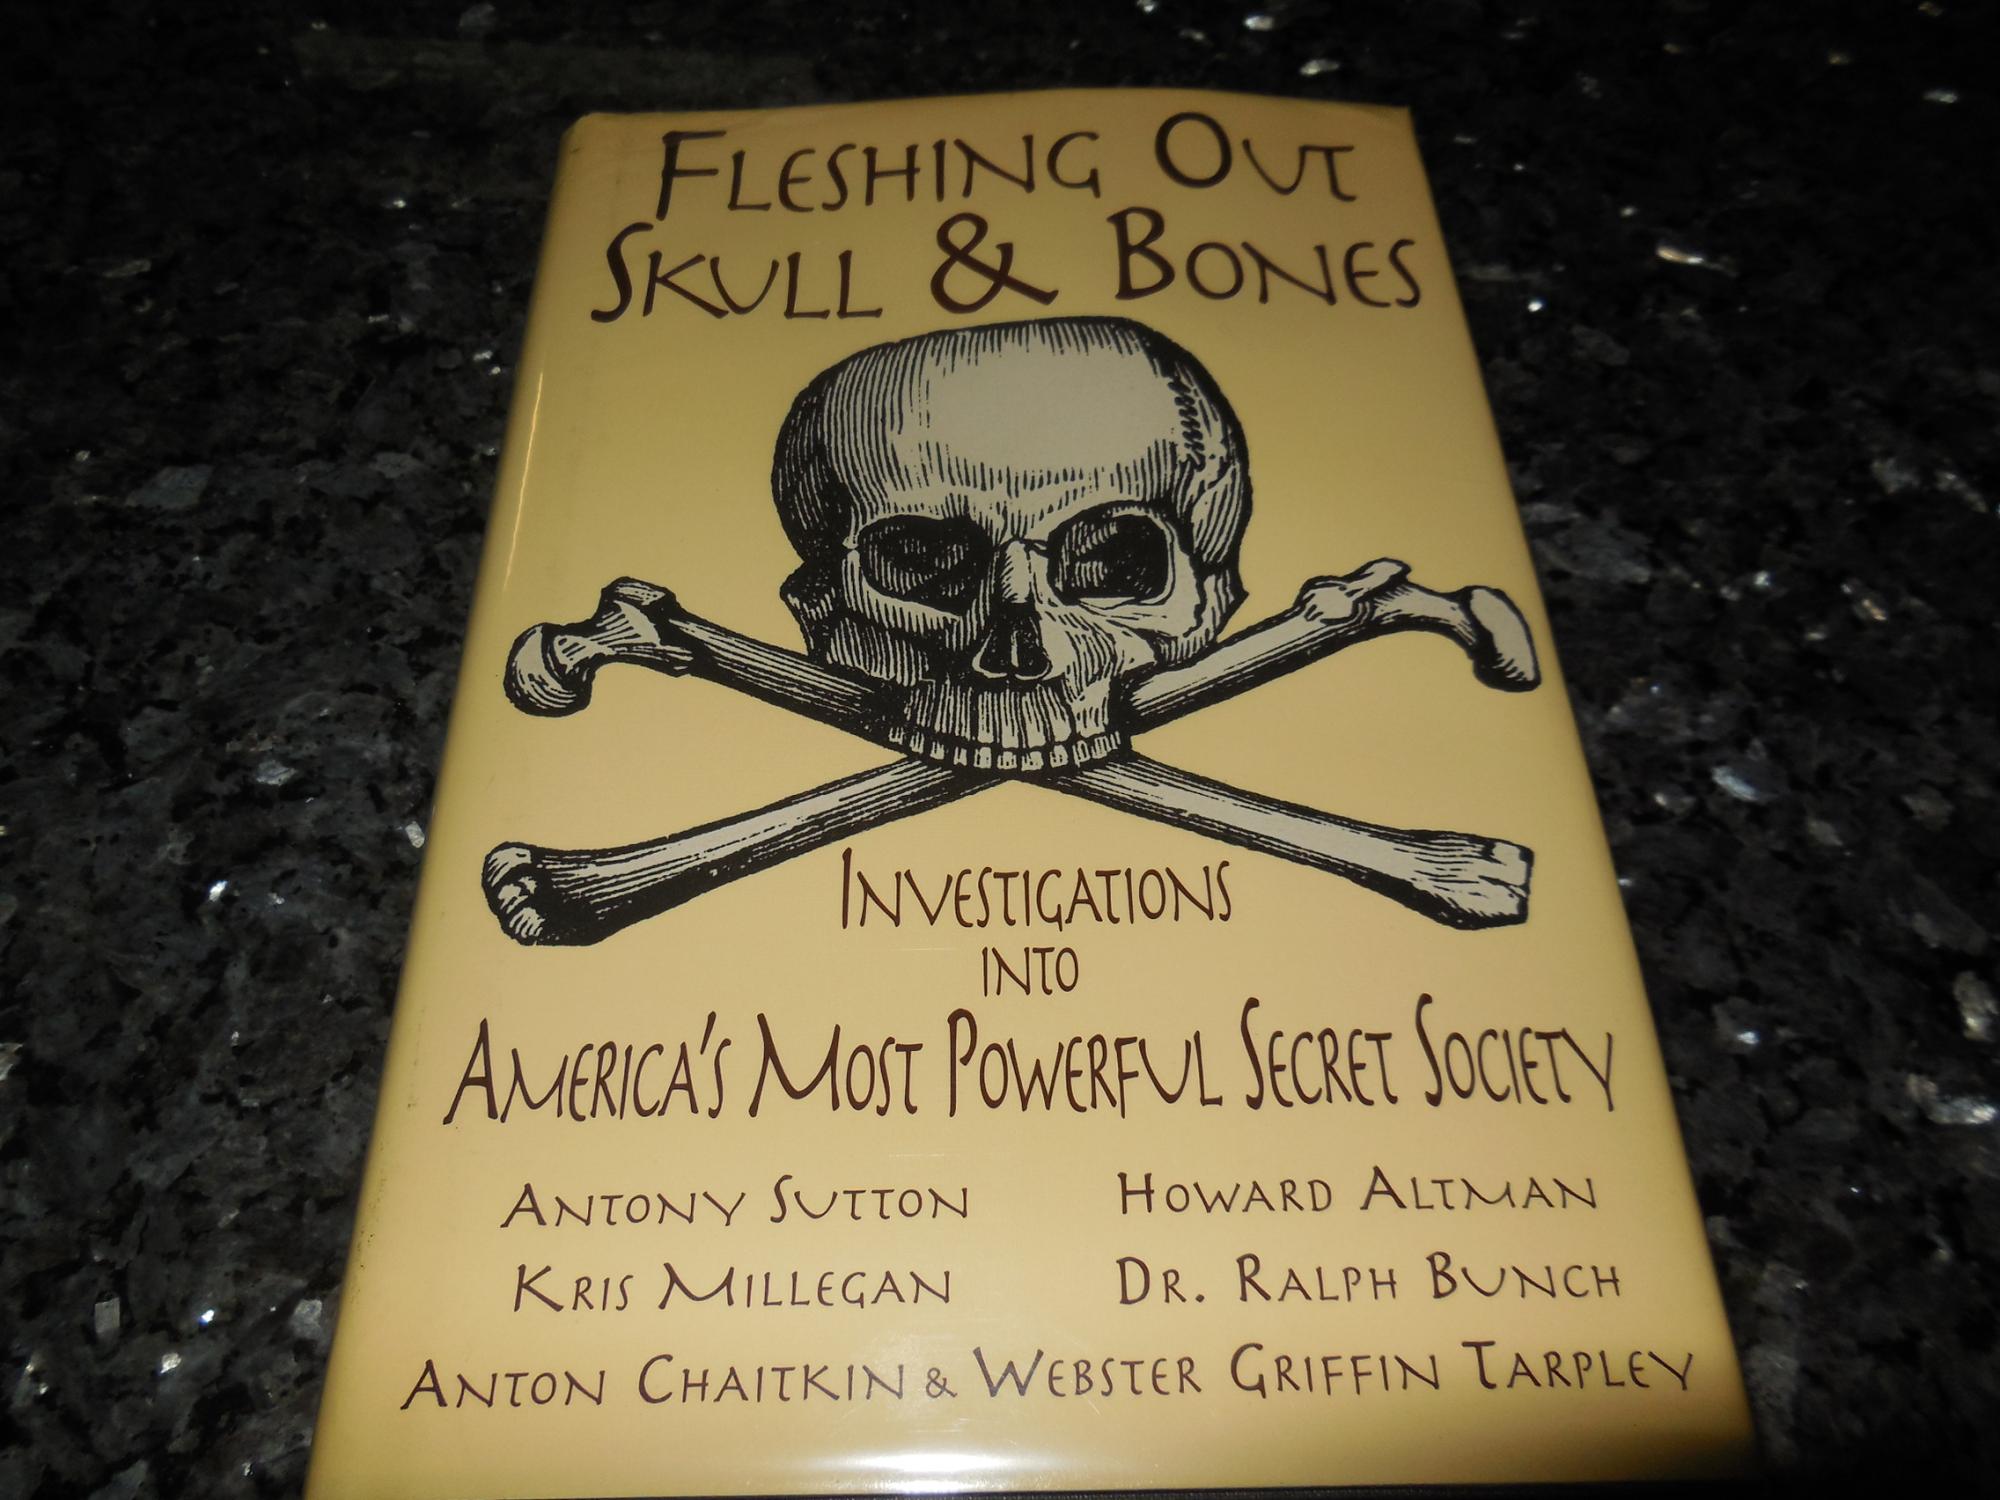 Fleshing Out Skull & Bones: Investigations into America's Most Powerful Secret Society